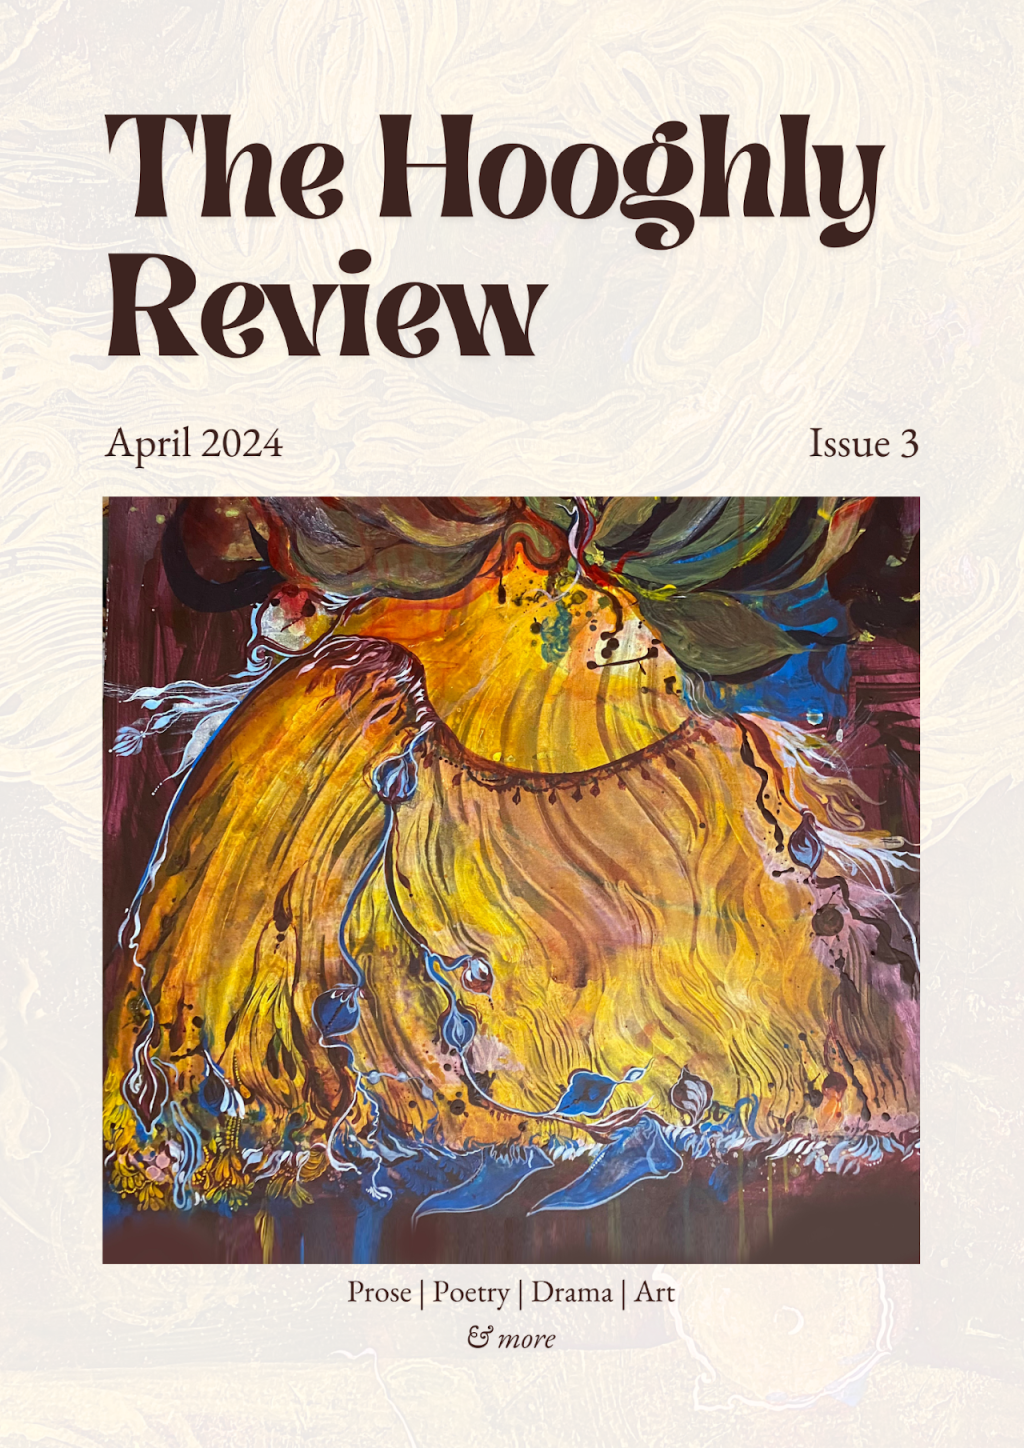 Artwork in The Hooghly Review Issue 3